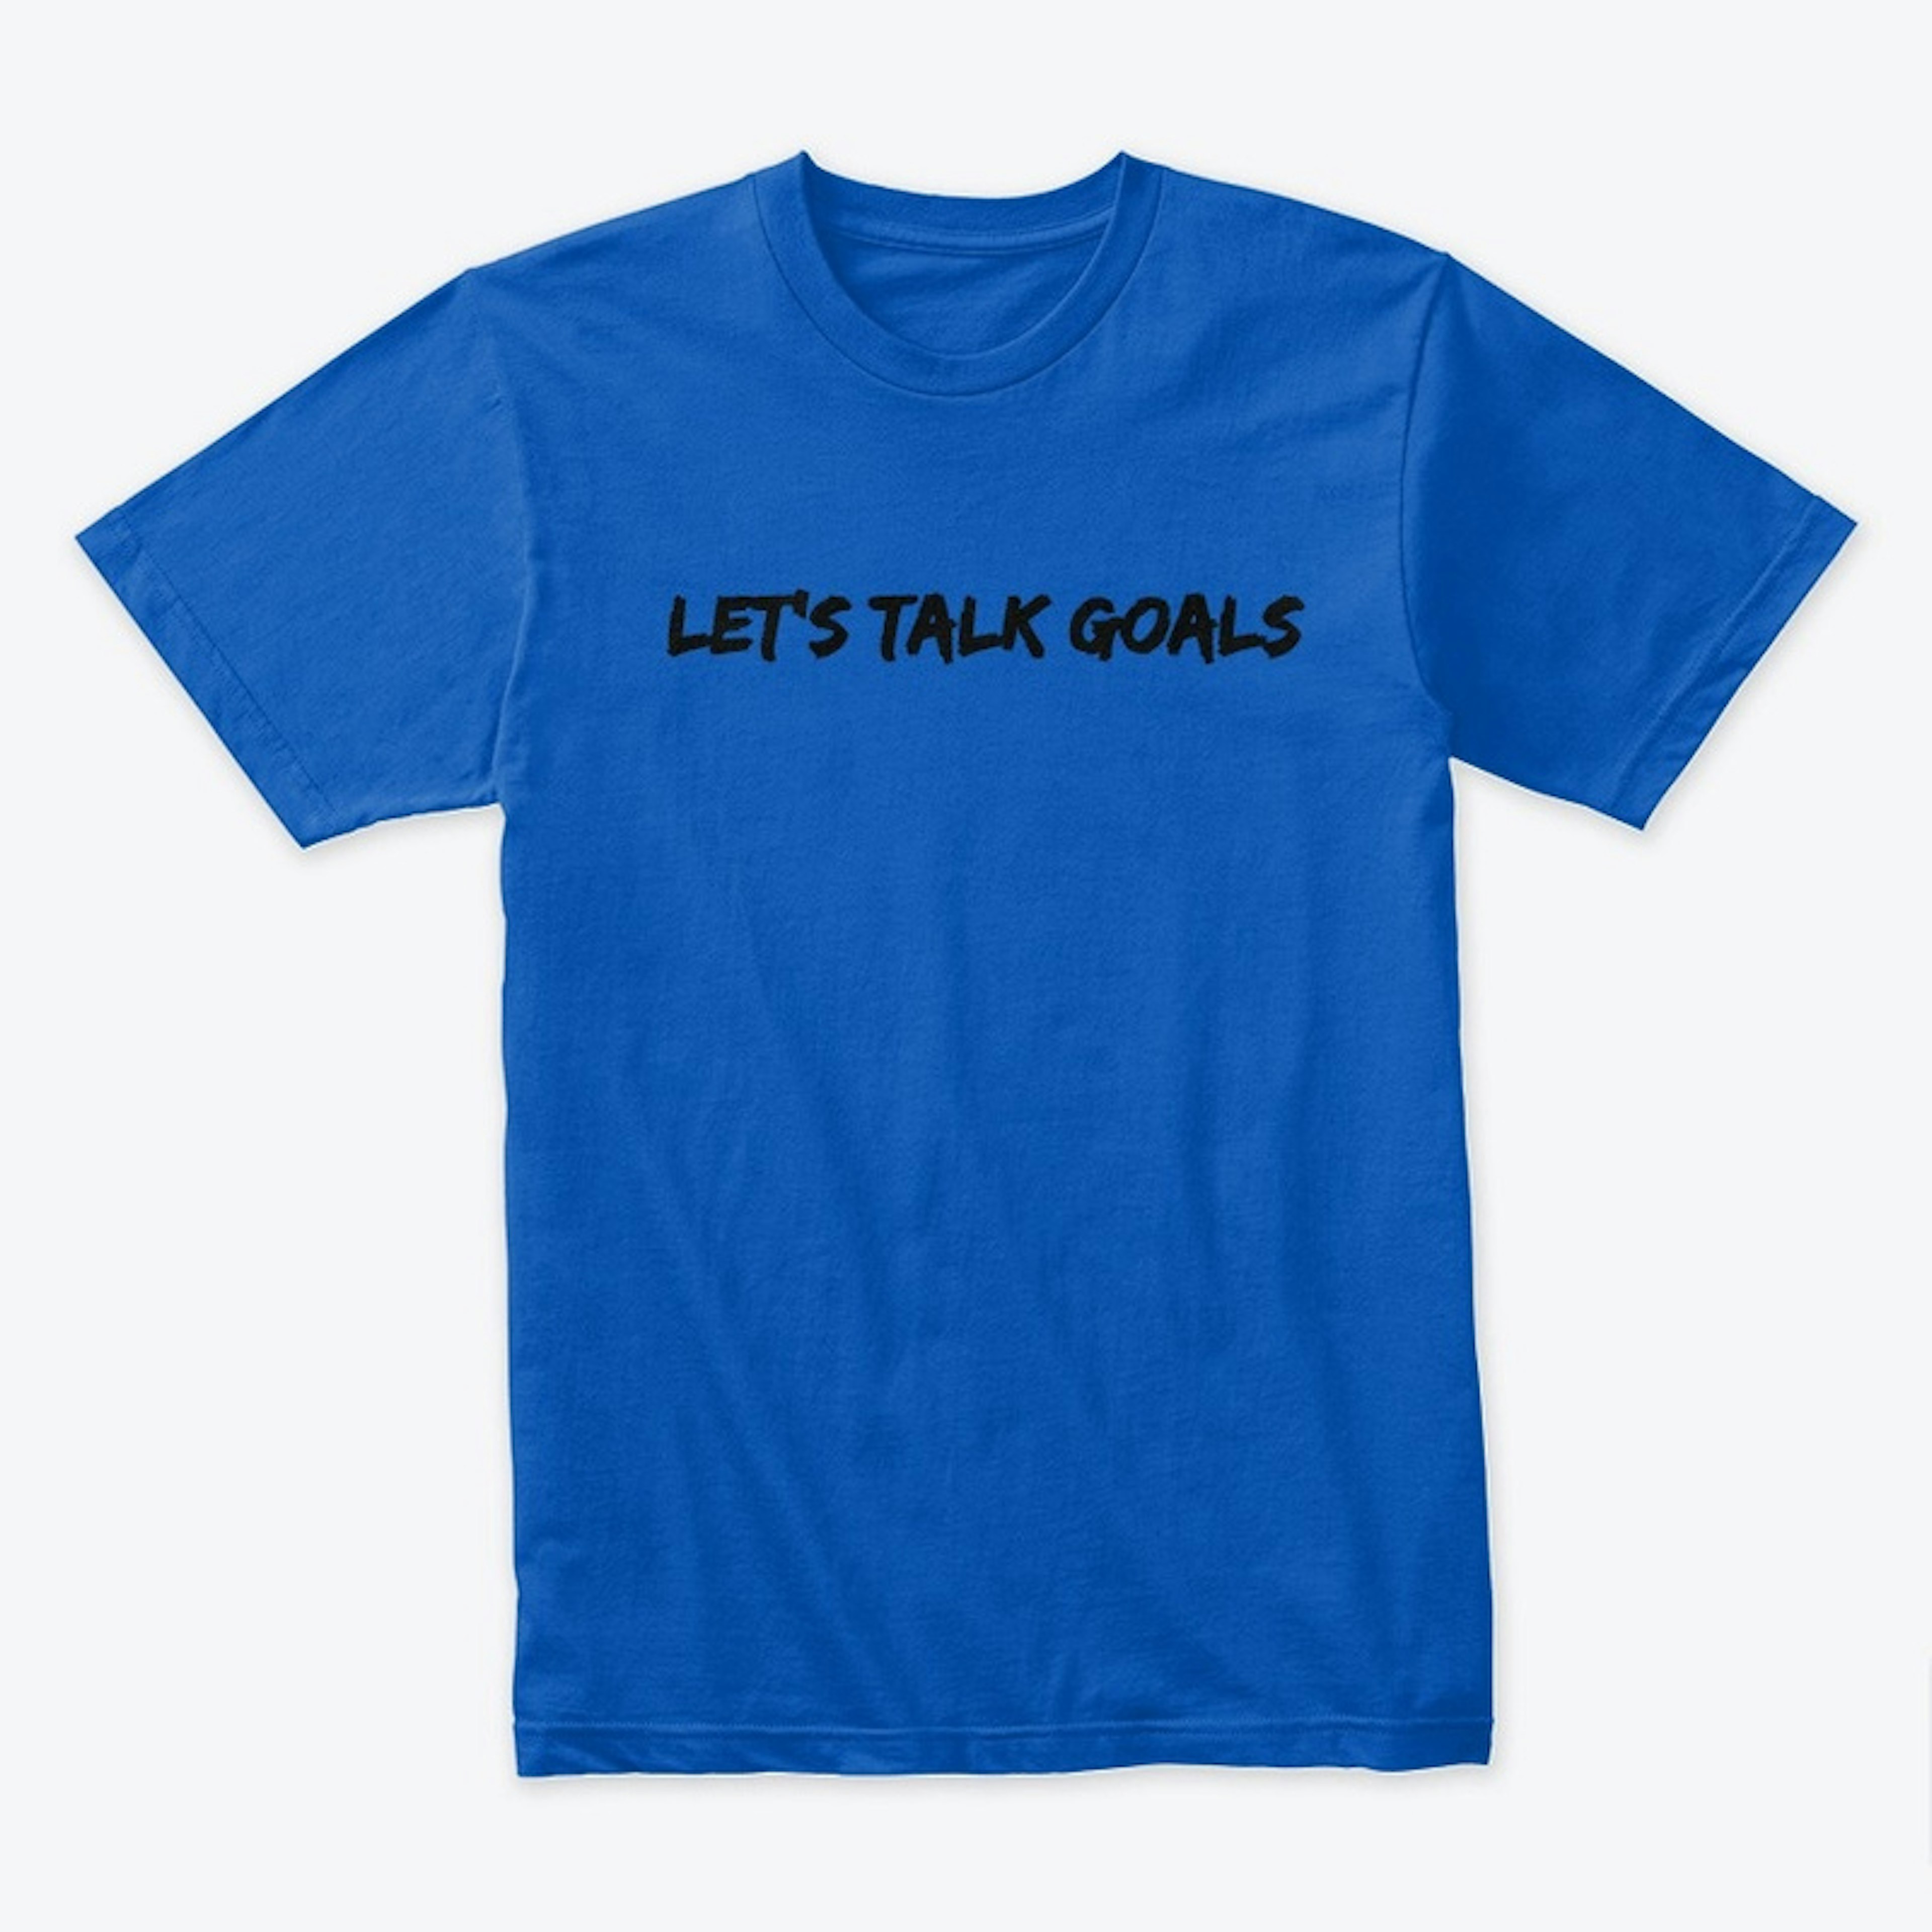 Let's Talk Goals by NWCL Apparel